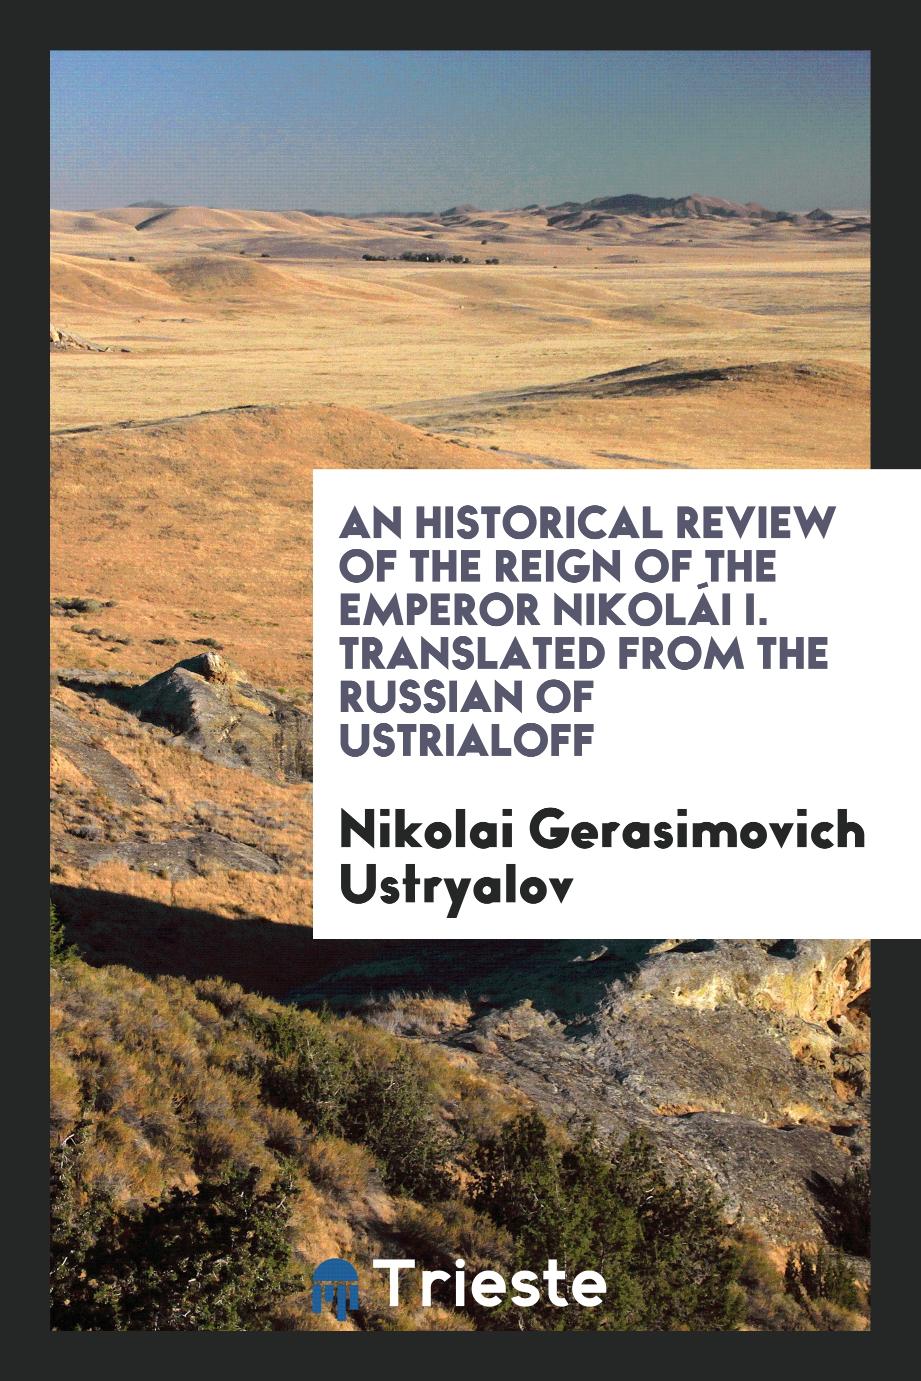 An Historical Review of the Reign of the Emperor NikoláI I. Translated from the Russian of Ustrialoff